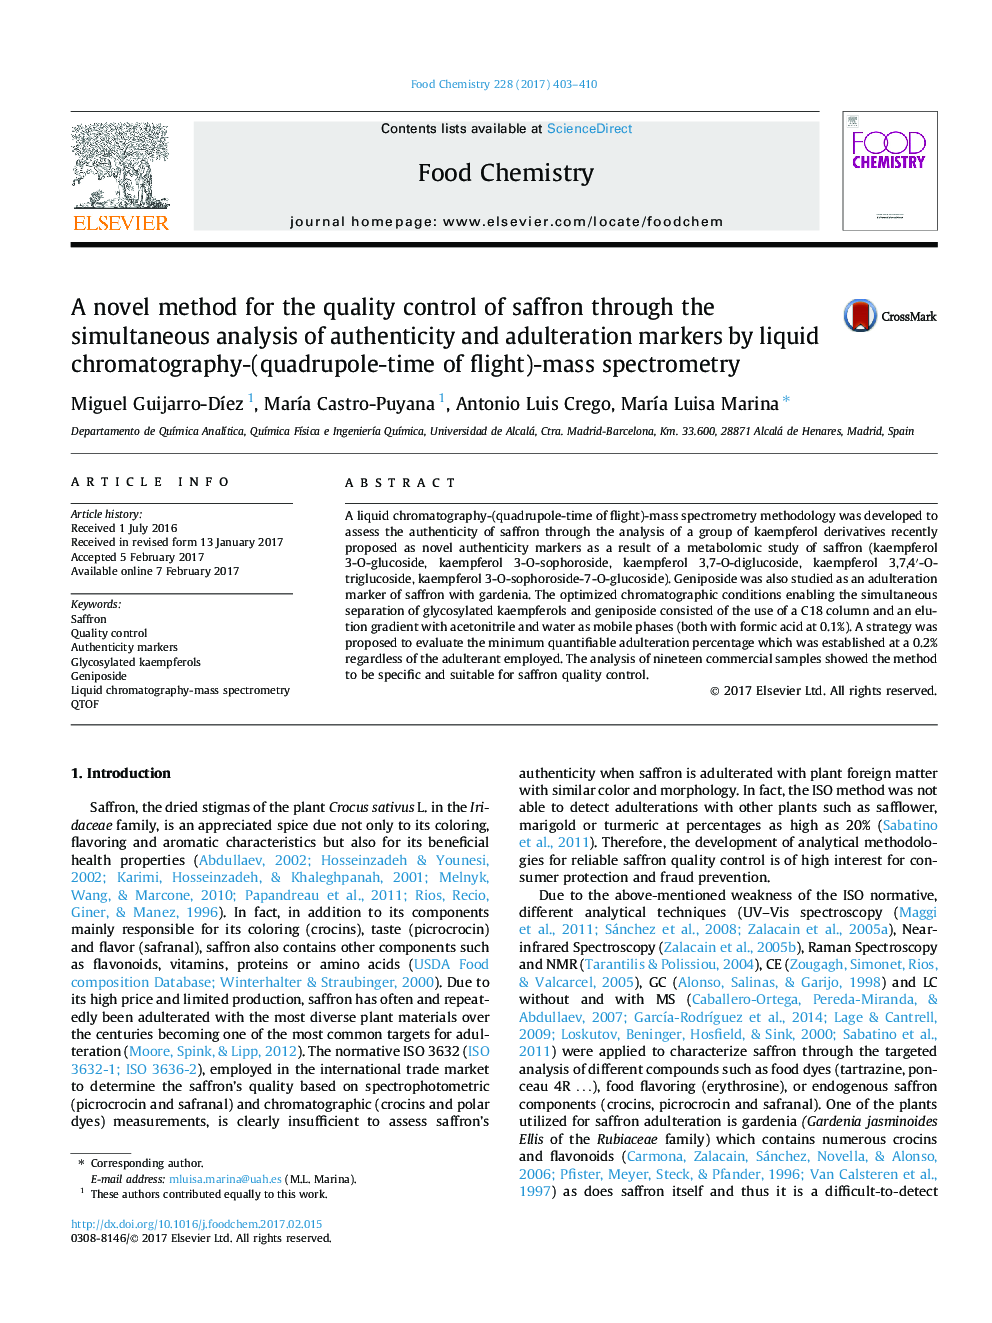 A novel method for the quality control of saffron through the simultaneous analysis of authenticity and adulteration markers by liquid chromatography-(quadrupole-time of flight)-mass spectrometry